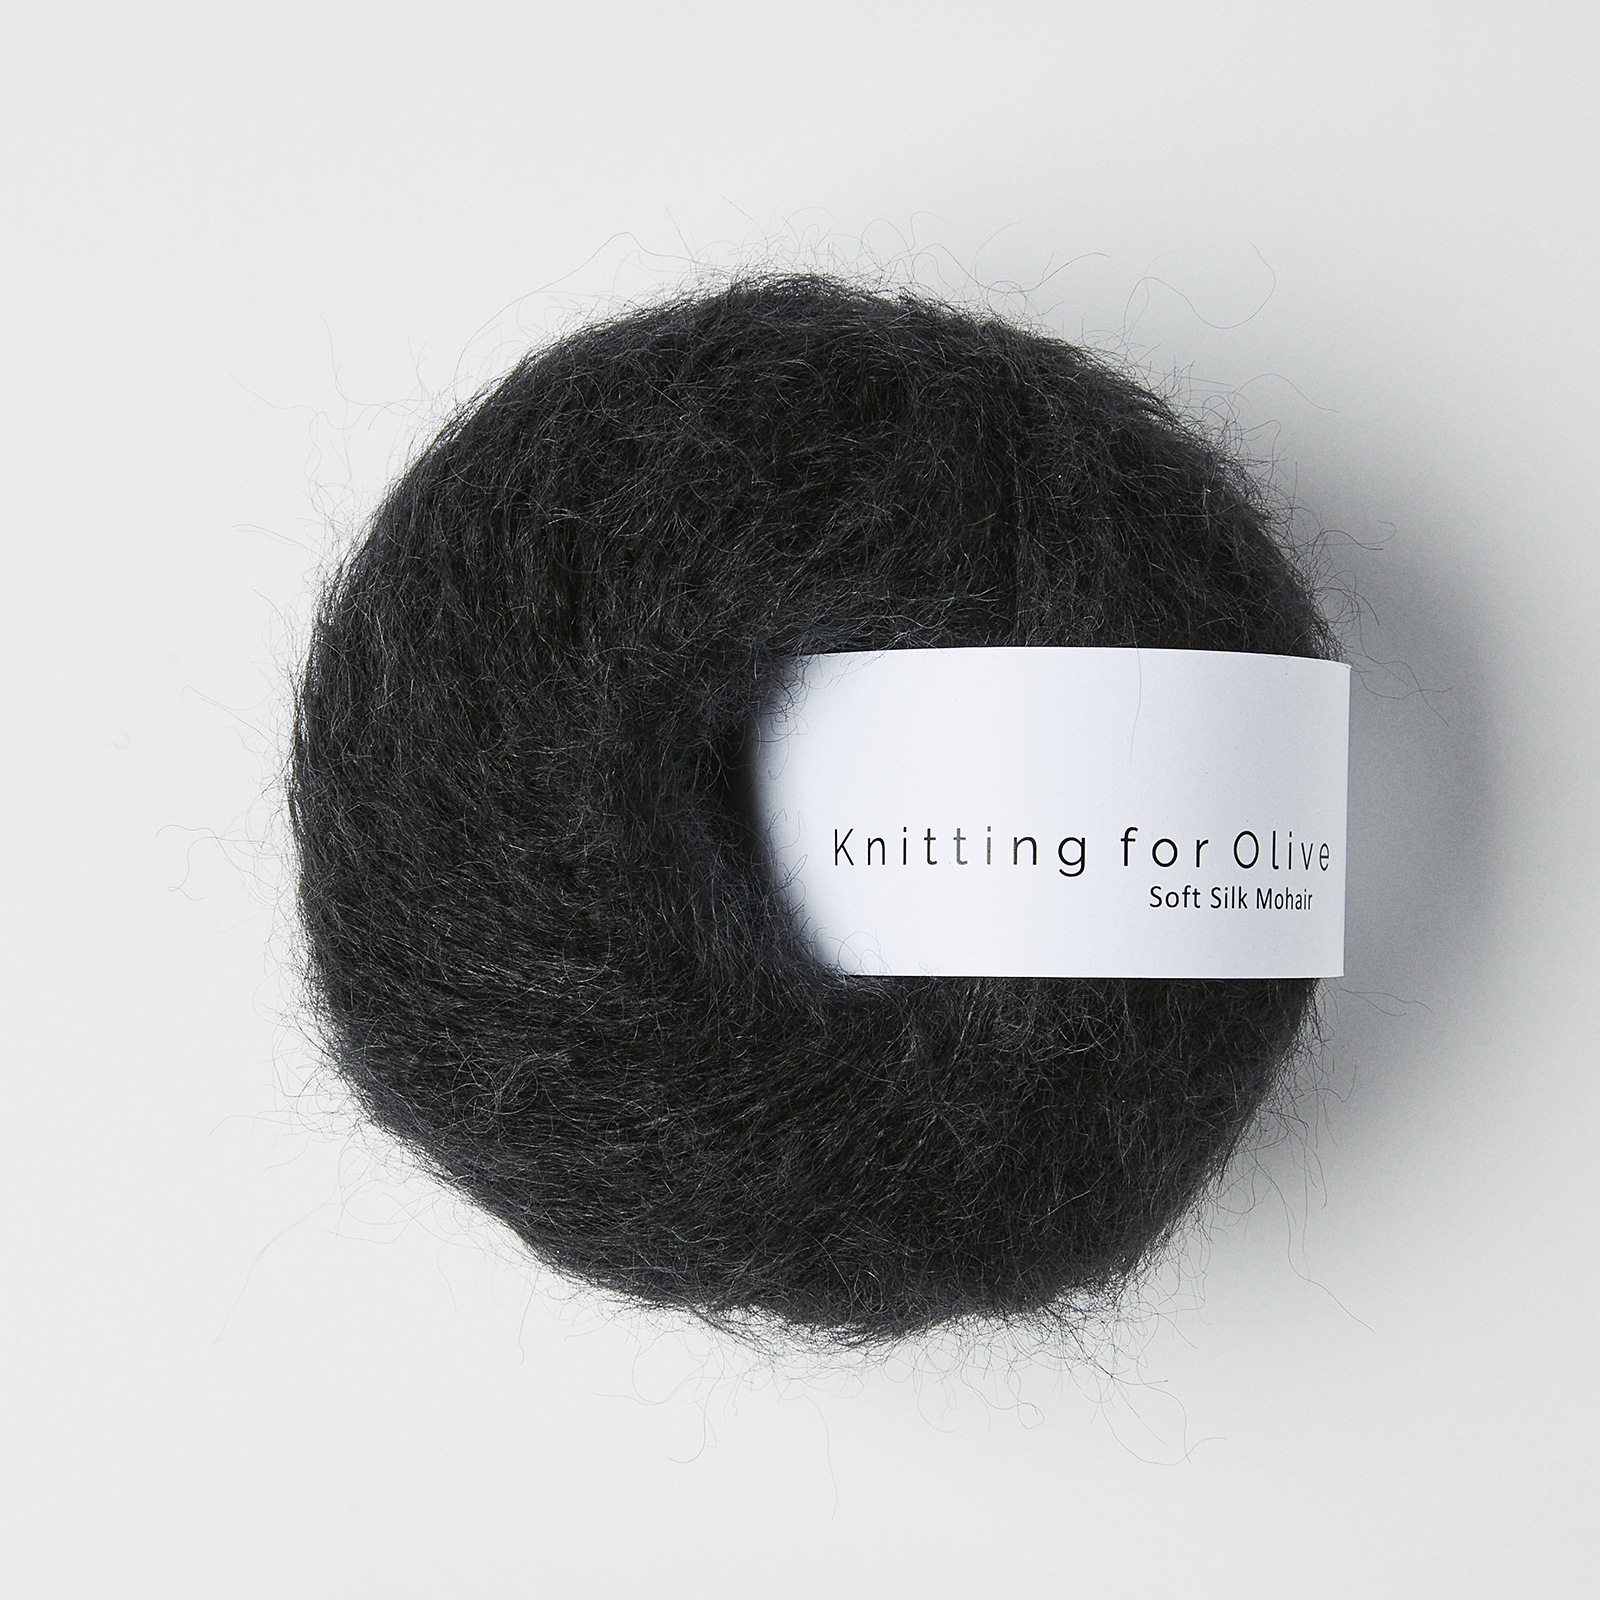 soft silk mohair knitting for olive | soft silk mohair: licorice